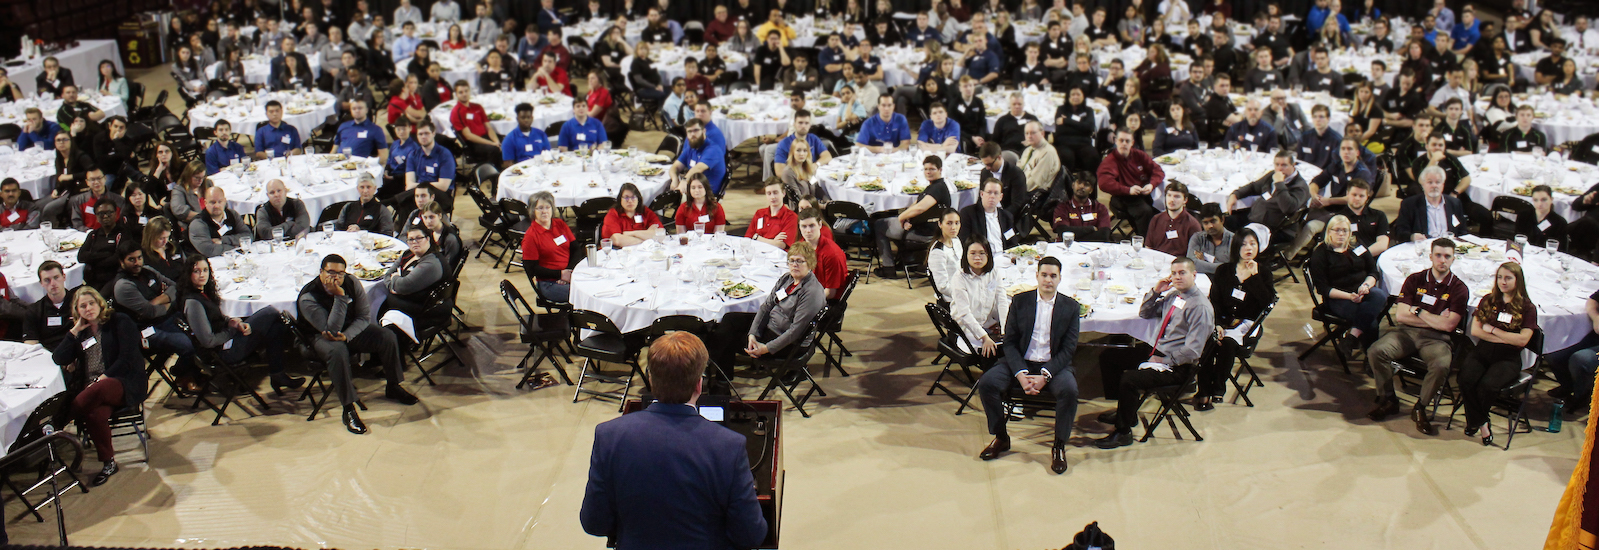 Scott King, Manager of Global Manufacturing and Industrial Internet of Things at Ford Motor Company, addresses over 200 students at the 7th Annual ERPsim Invitational Competition, before the competition begins on Feb. 14, 2019.